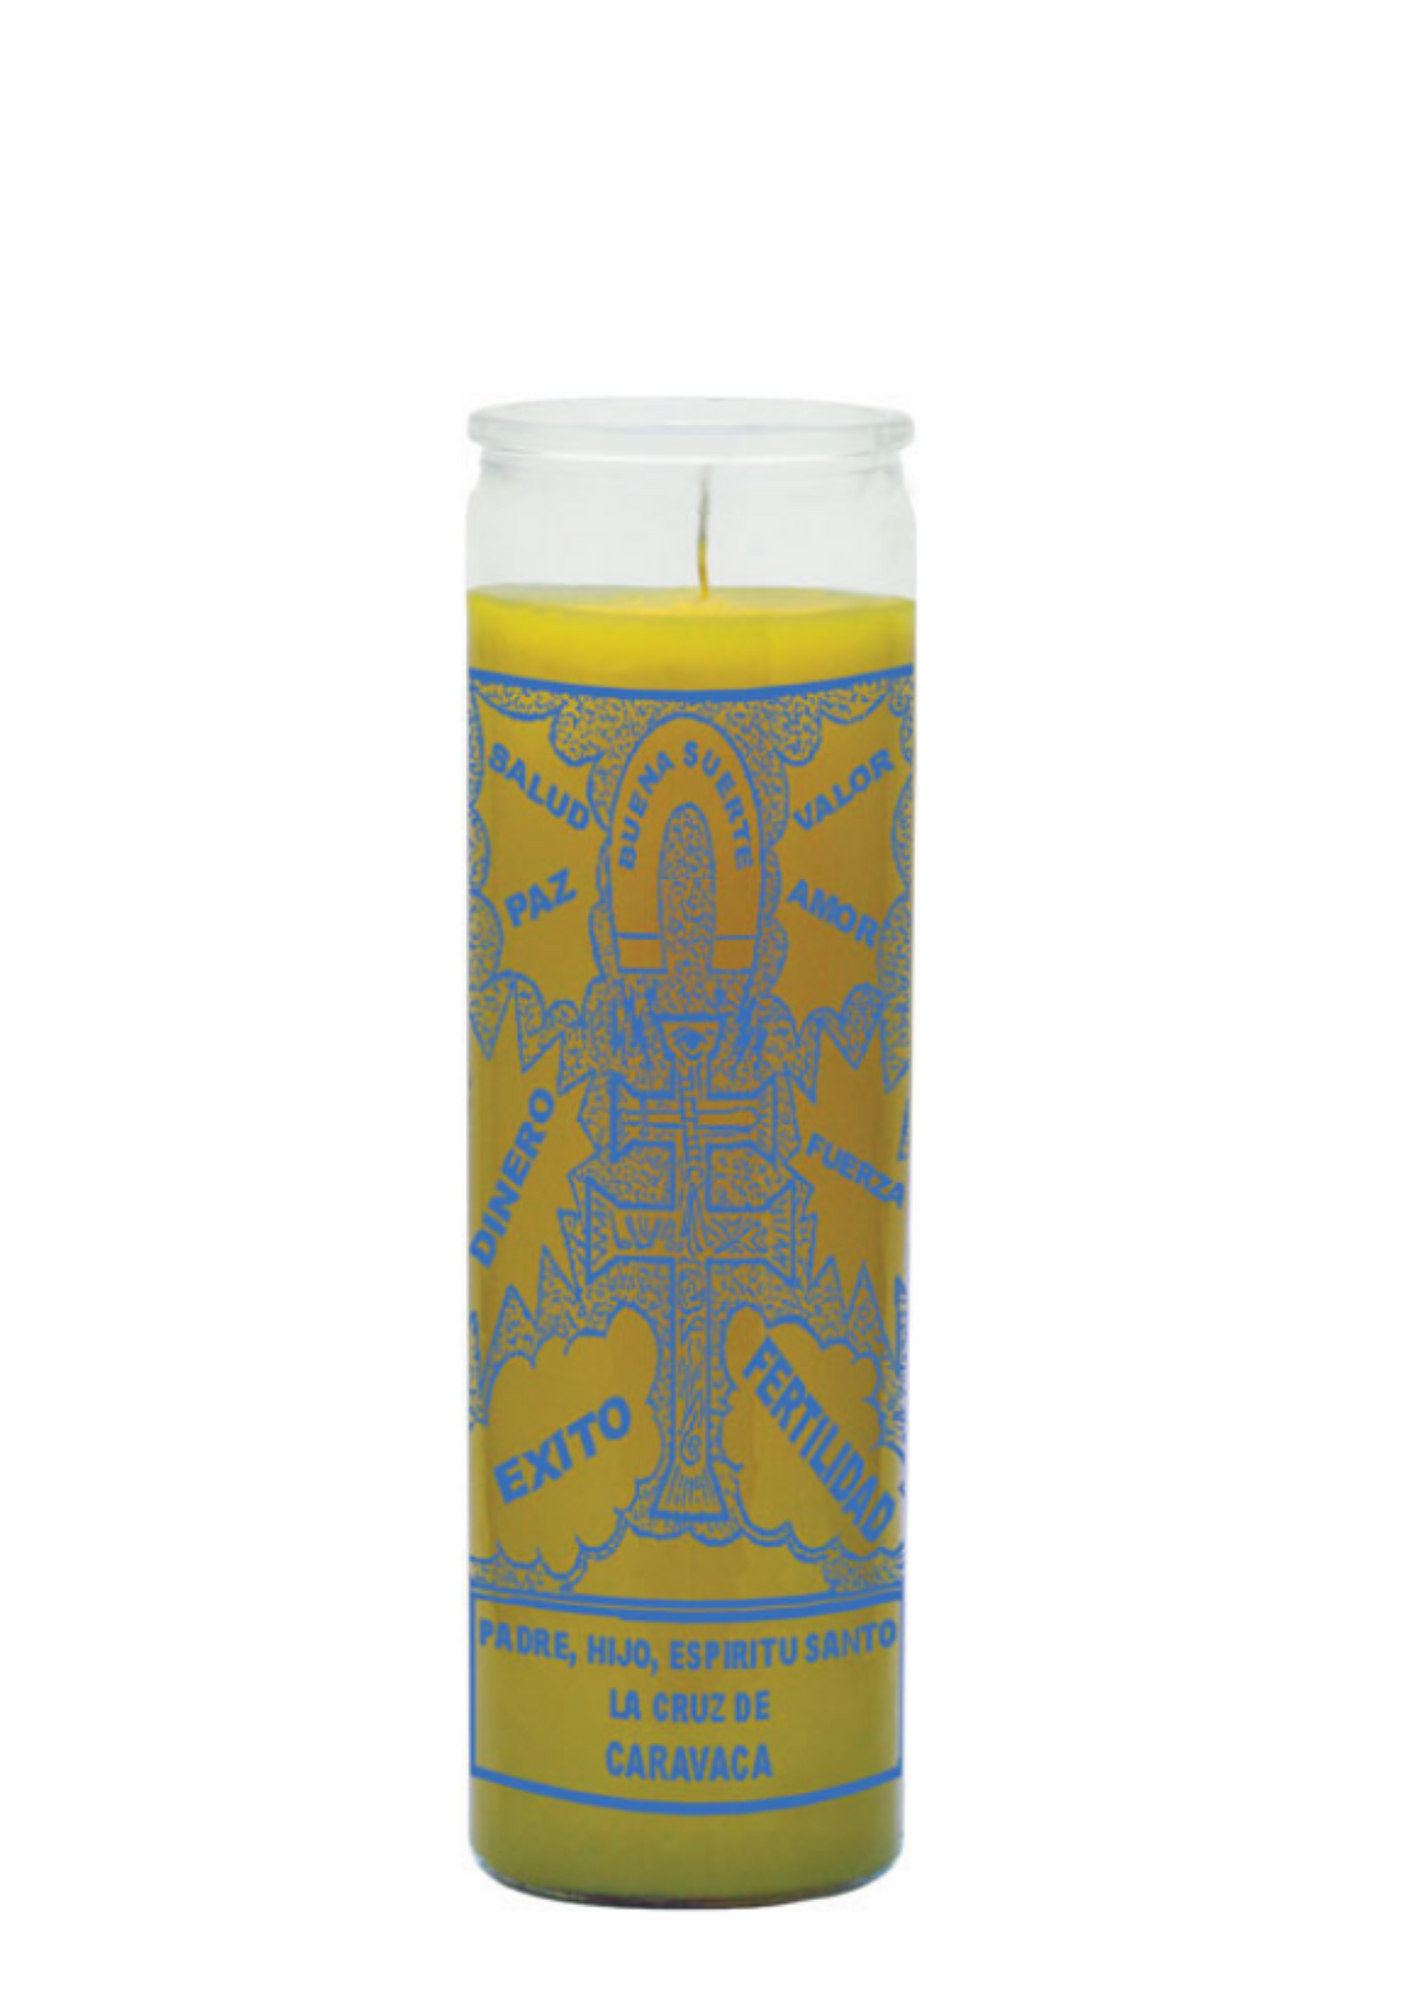 Cross of caravaca (yellow) 1 color 7 day candle